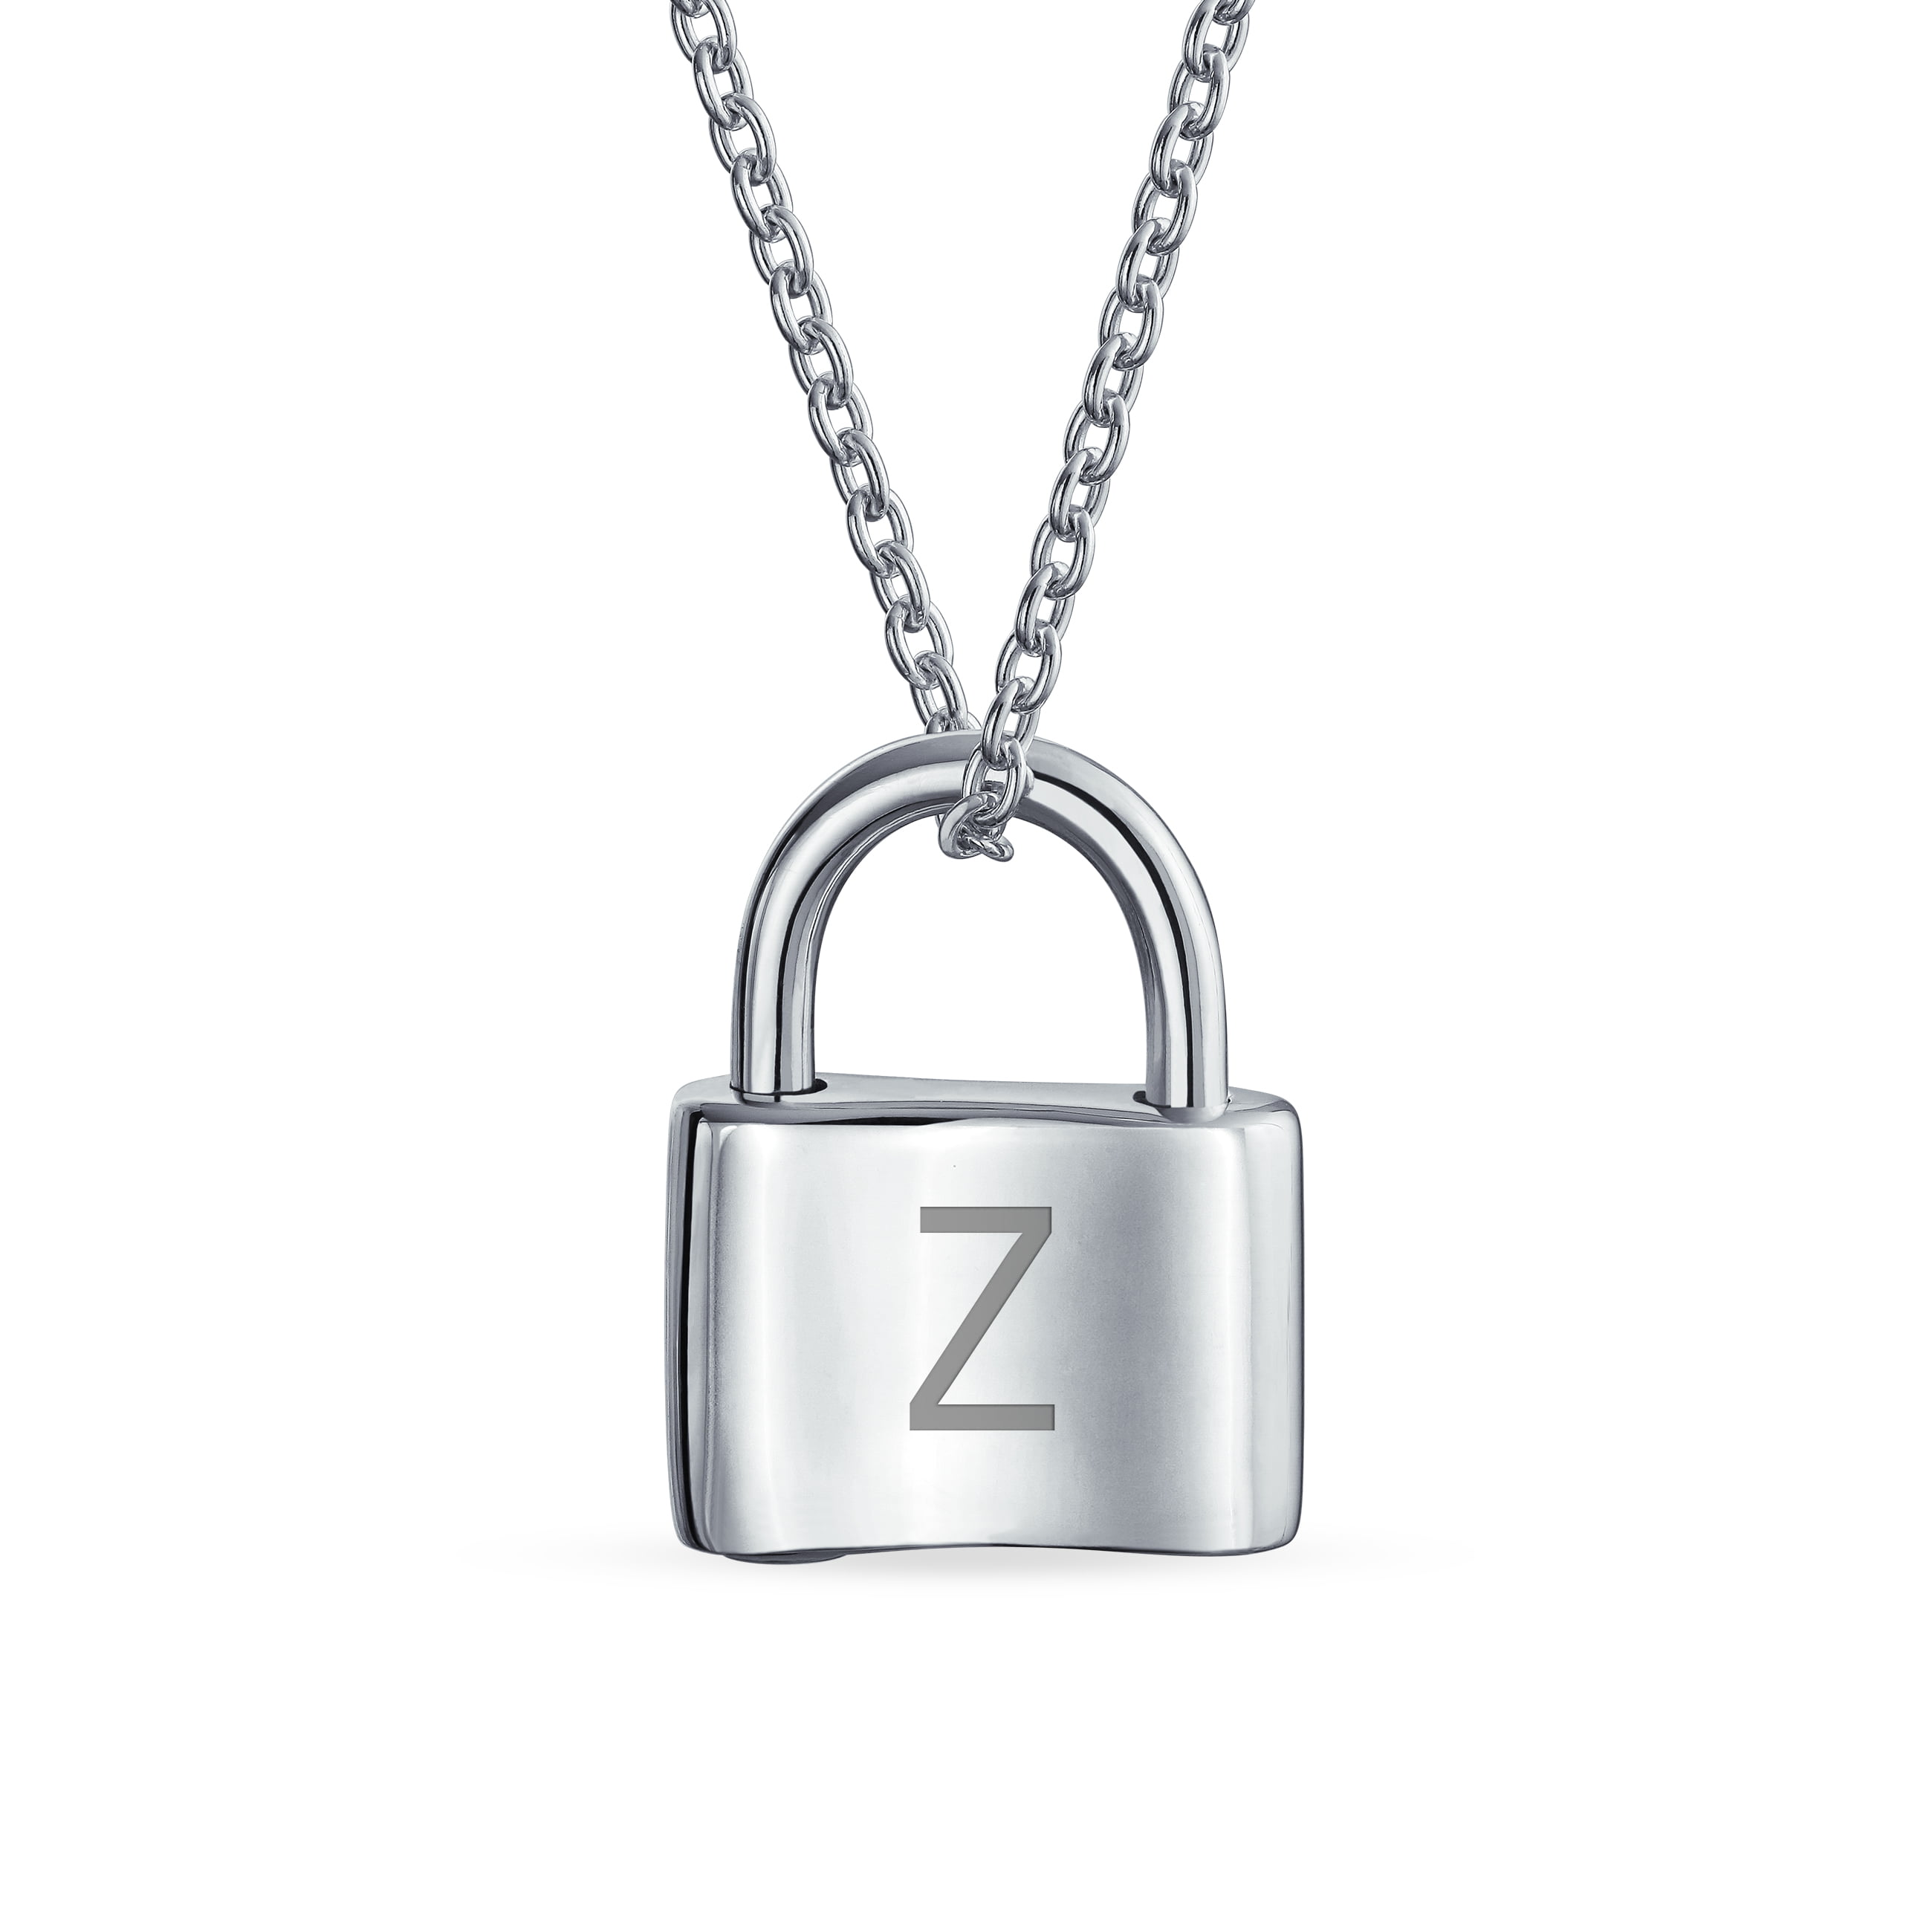 Personalized Initial R Lovers Padlock Lock Pendant Necklace Silver